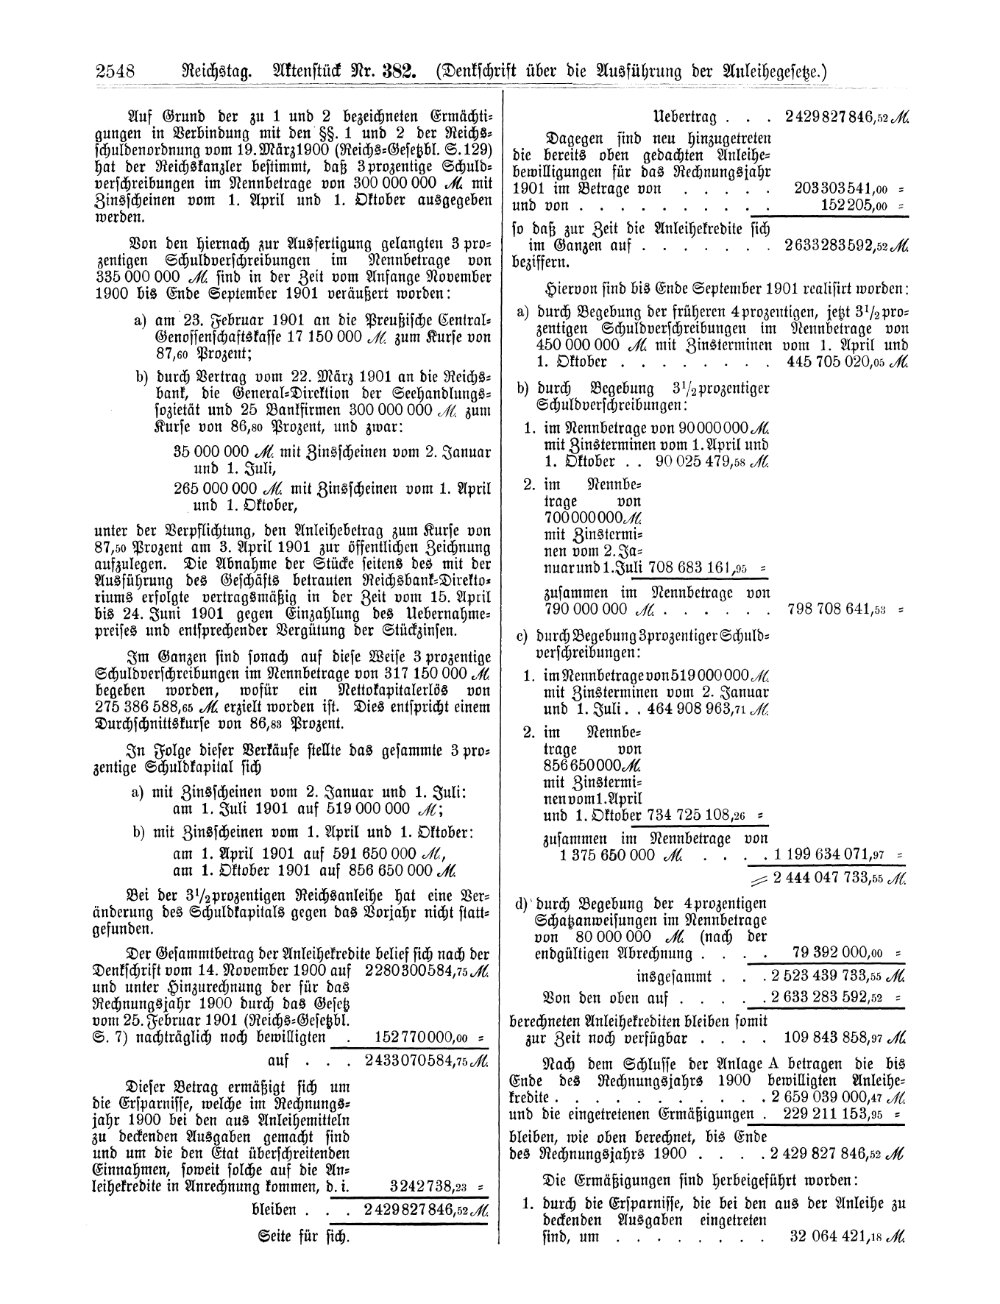 Scan of page 2548